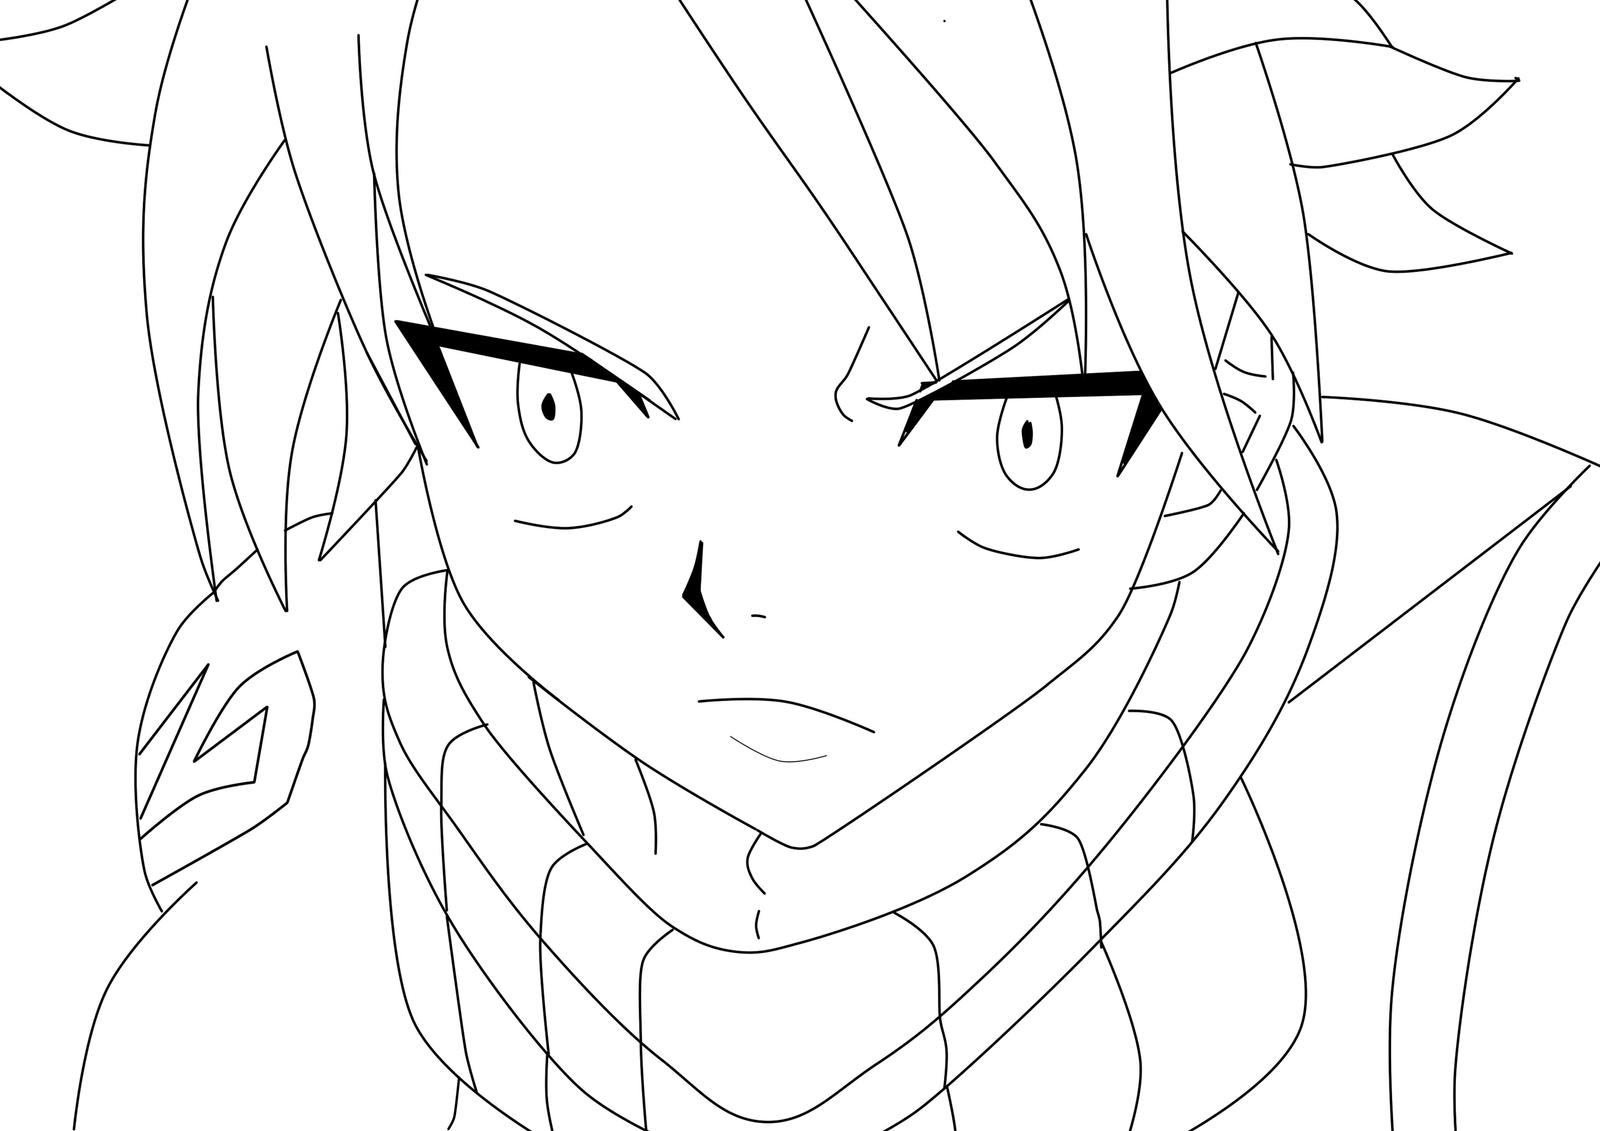 Natsu (without color) by Jwwt on DeviantArt